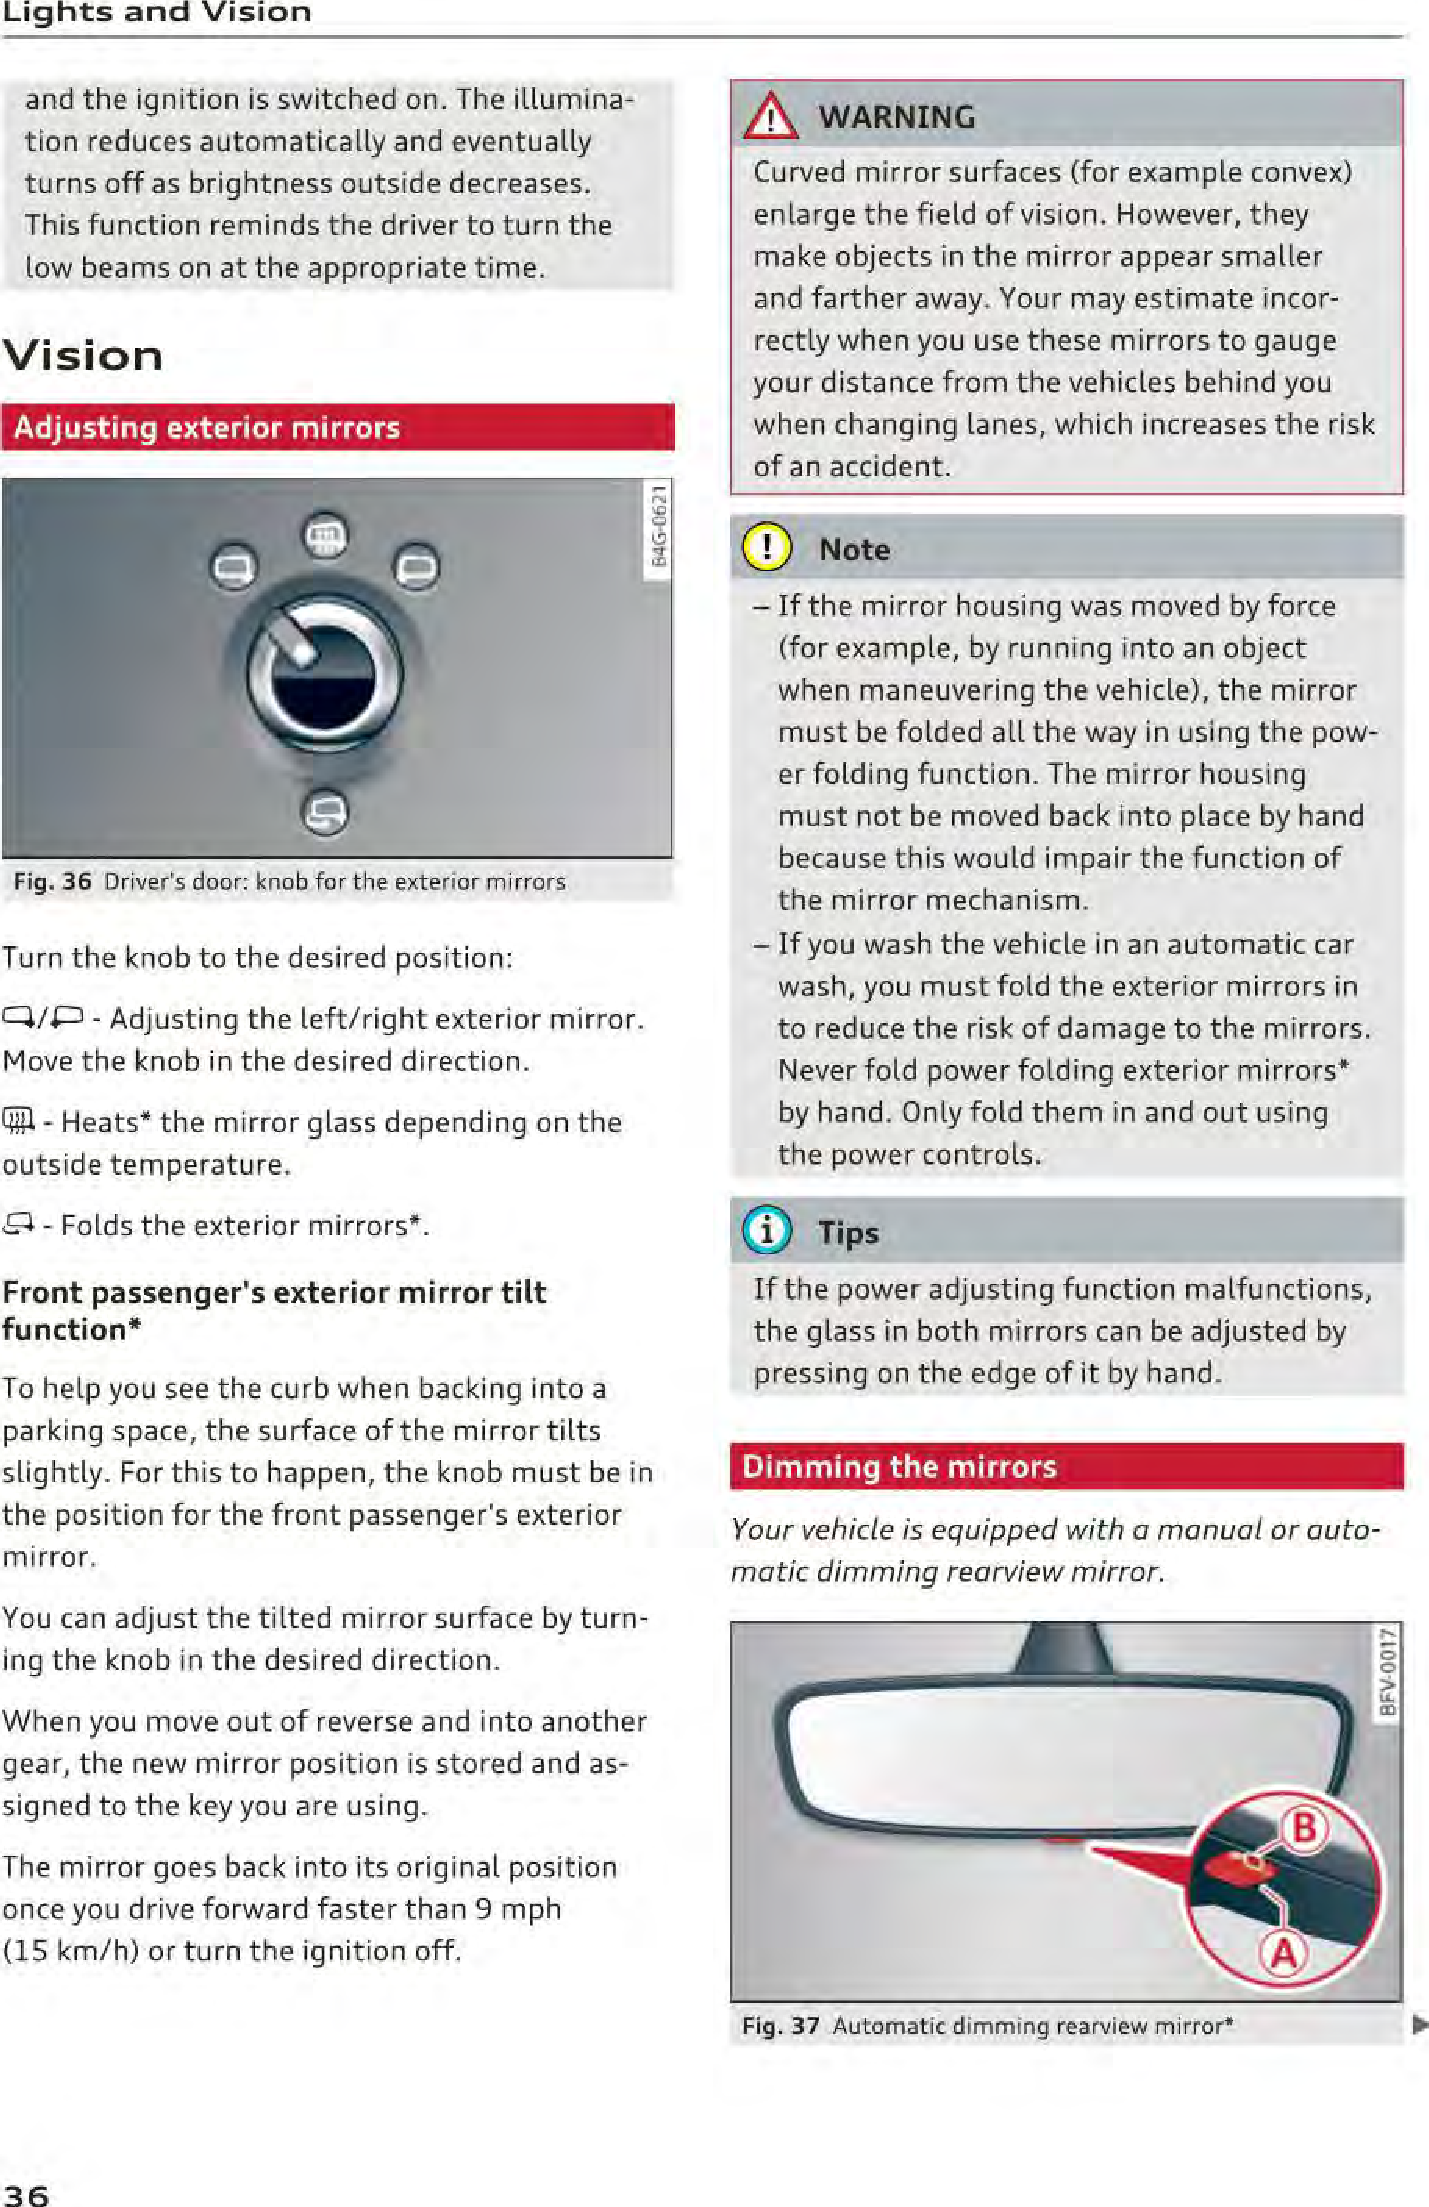 Page 38 of Robert Bosch Car Multimedia AUFPK20 Instrument cluster with immobilizer User Manual part 1